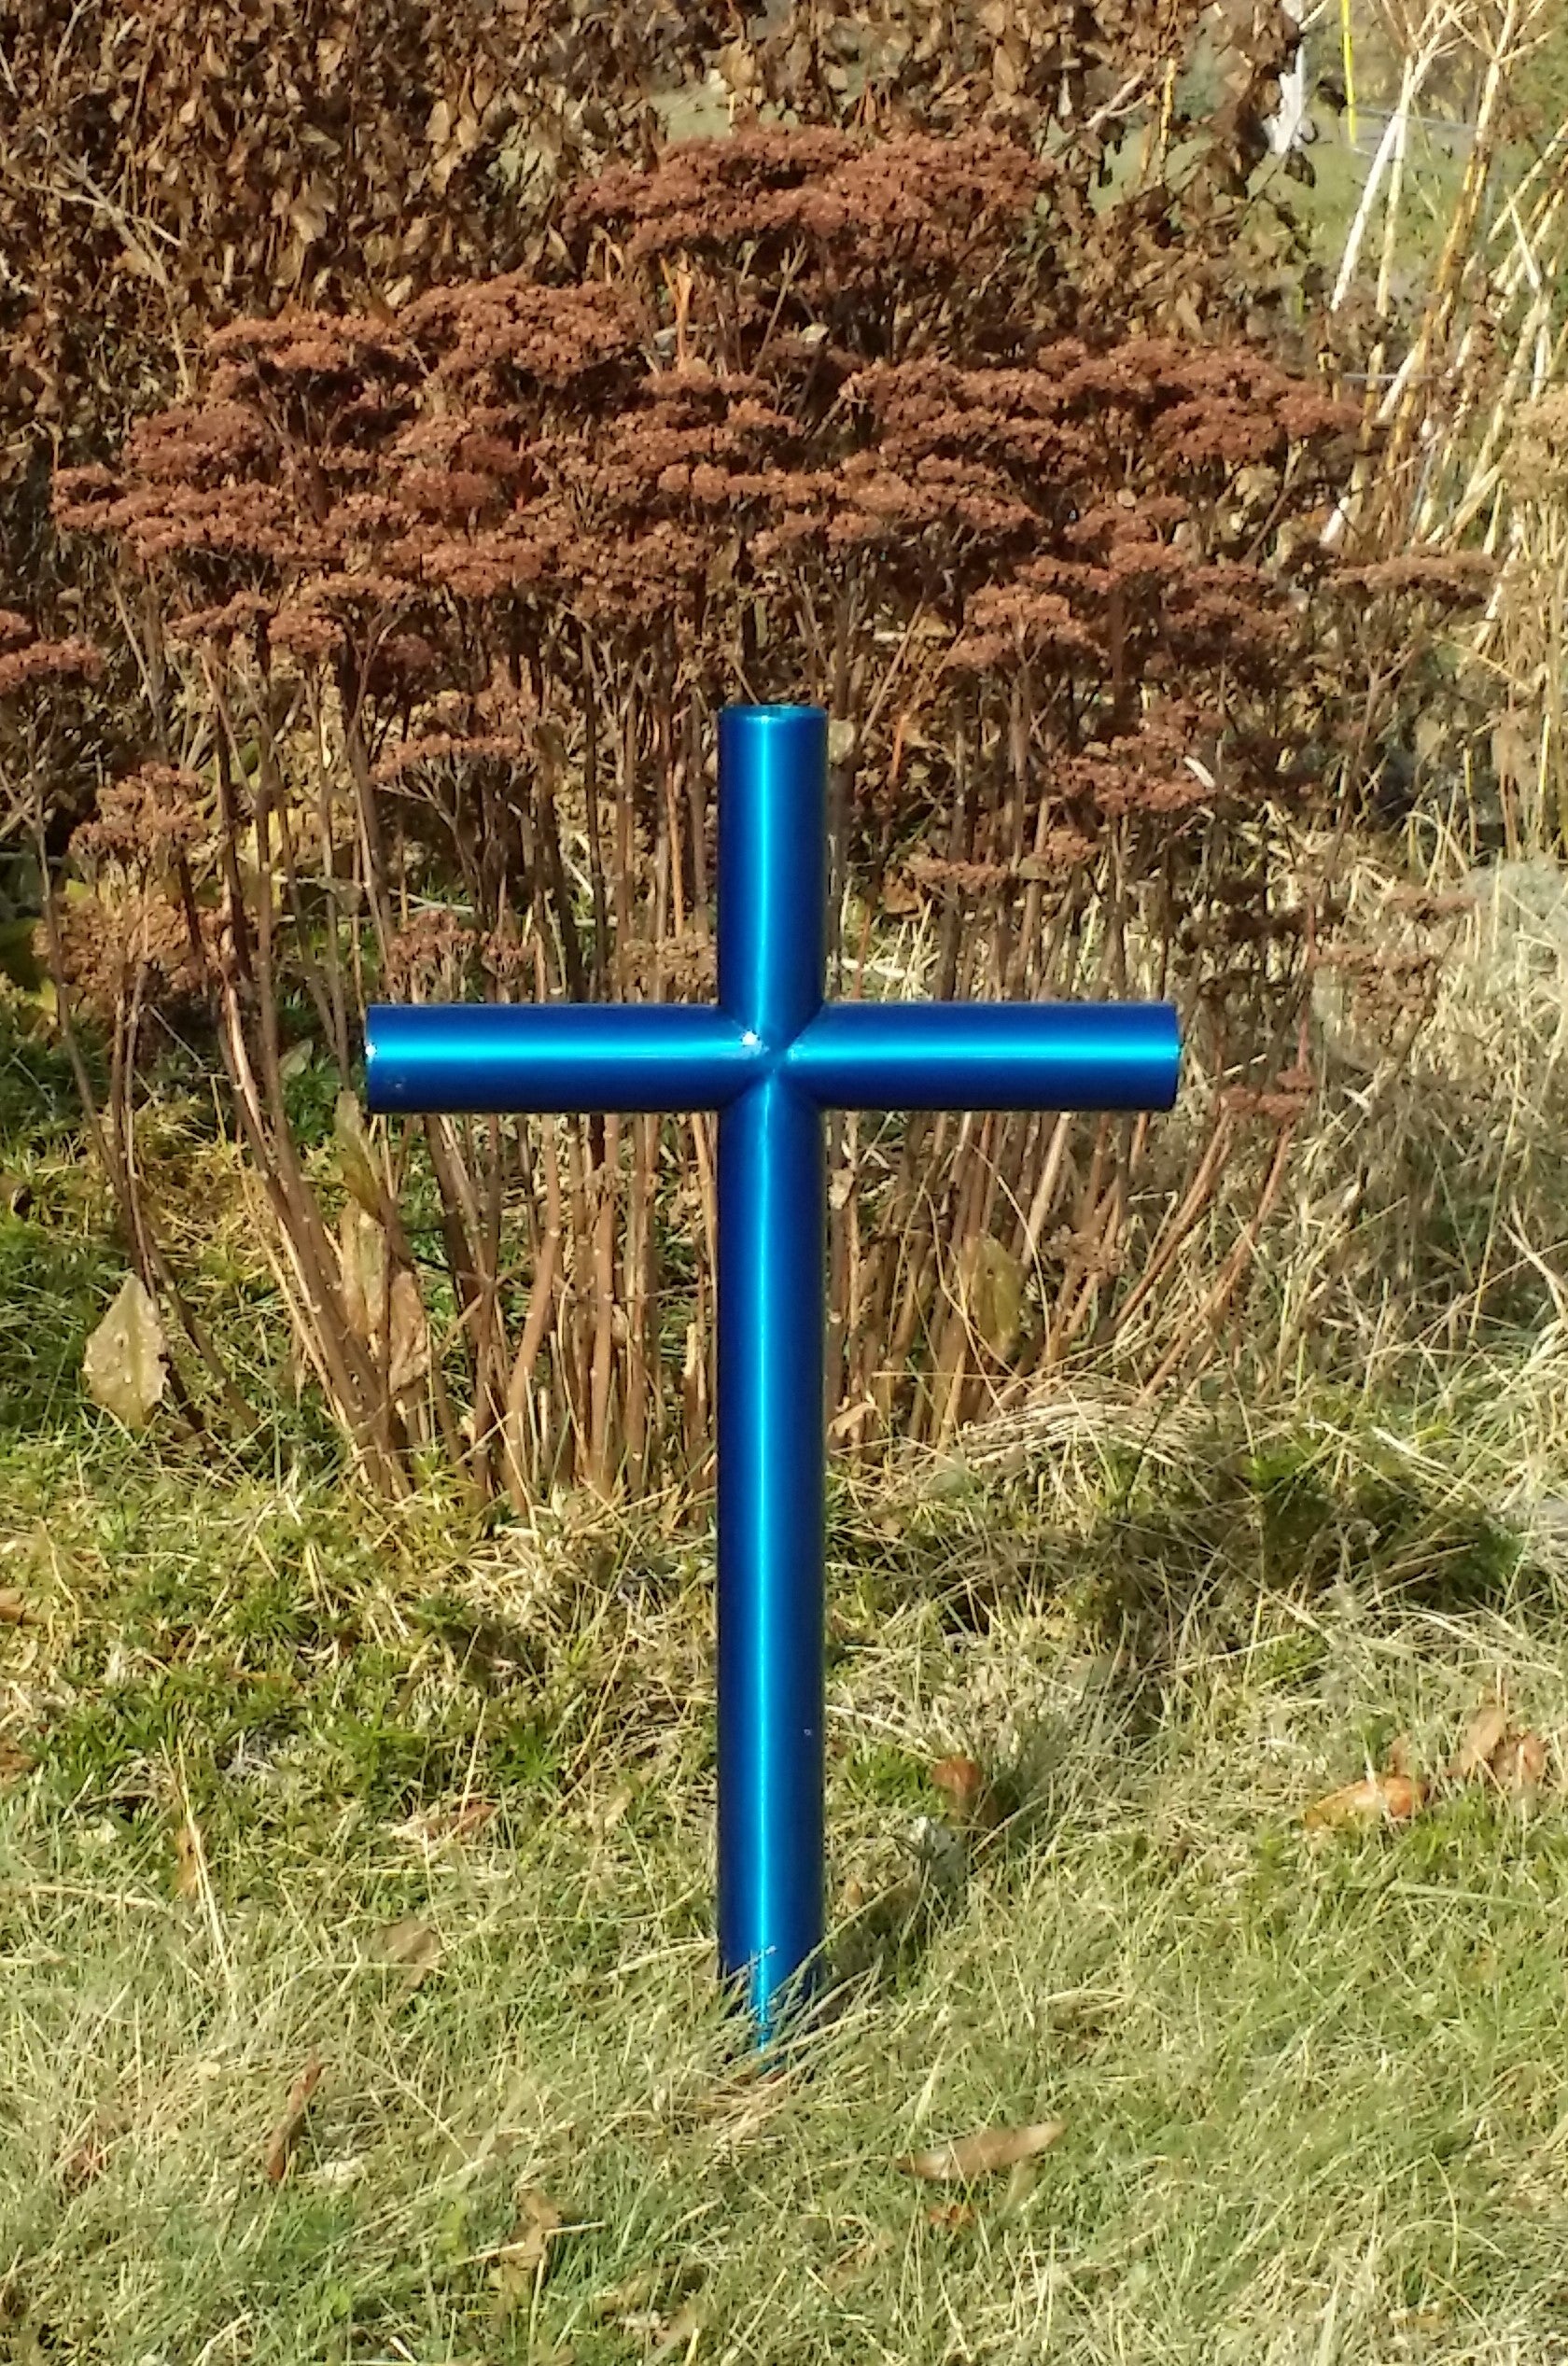 - Everlasting Cross Garden Memorial is Timeless, Just Like Your Loved One Lost. We Celebrate The Love We Have By Remembering Them With Memorial Urn, Stone, Sign or Keepsake. When A Family, Pet, Fallen Solder Is Lost, Their Monument Should Be As Unique As They Were